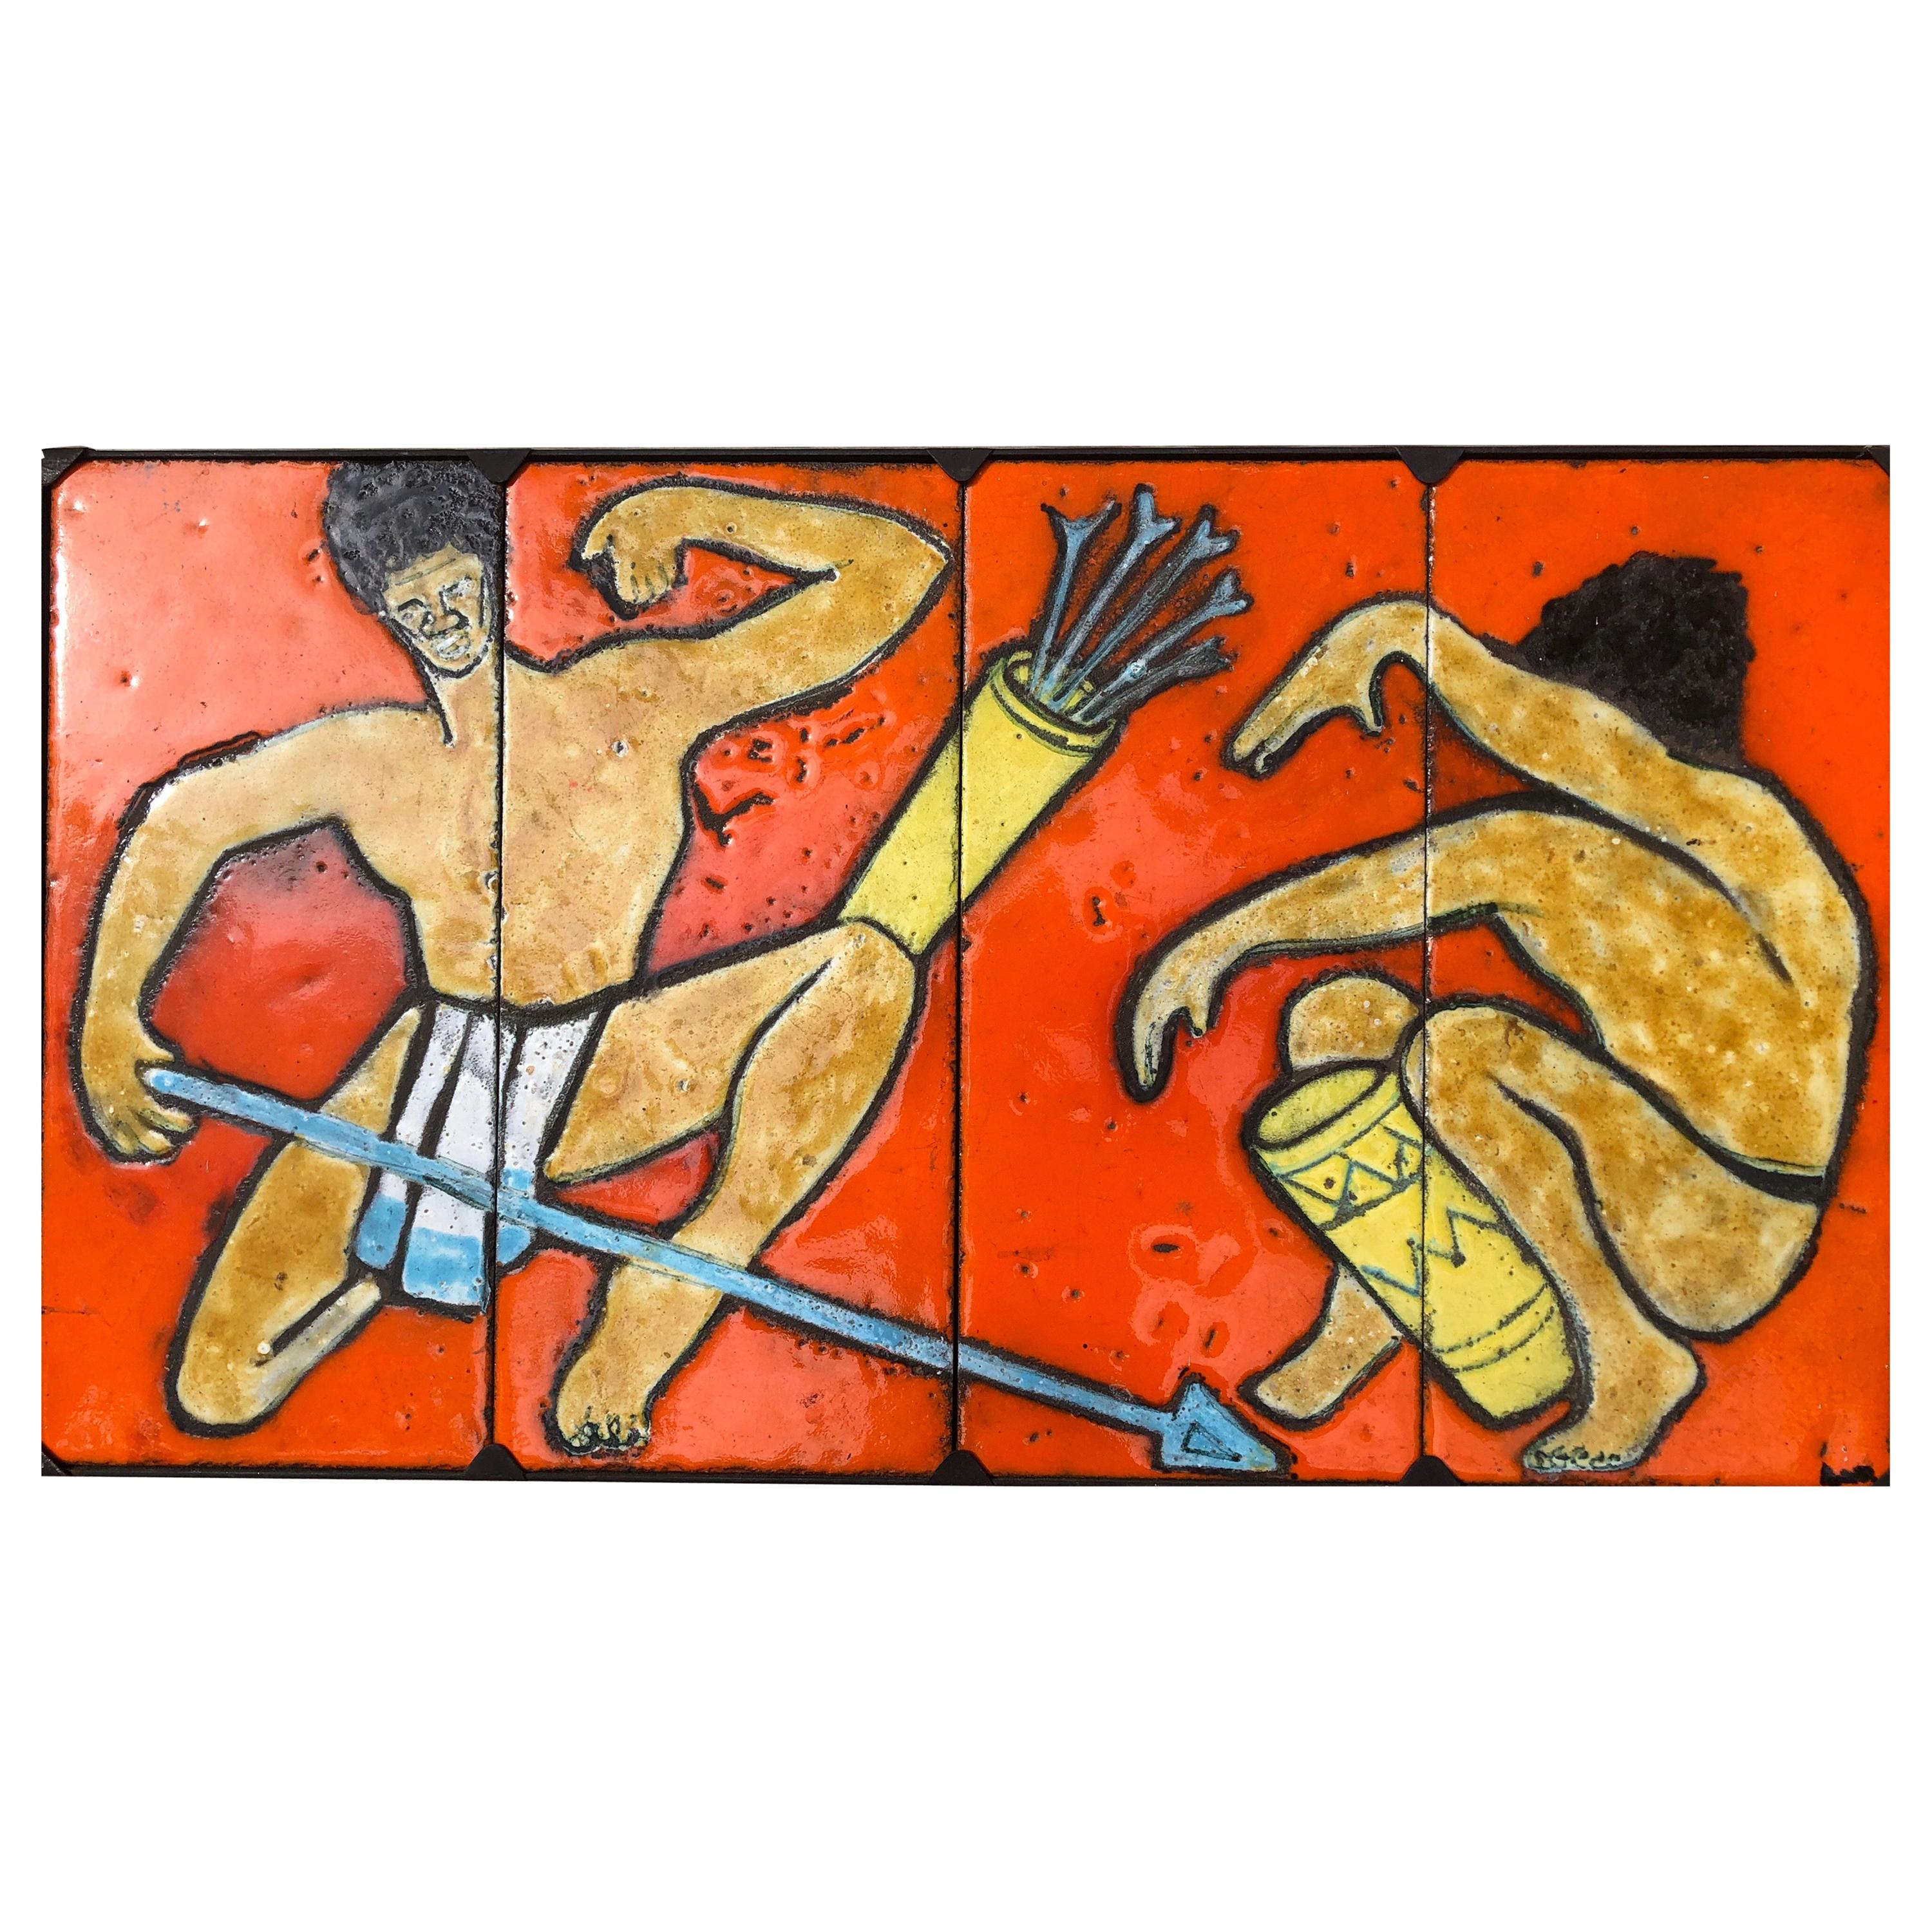 French Midcentury Painting, "La Danse" on Large Ceramic Panels by Vallauris